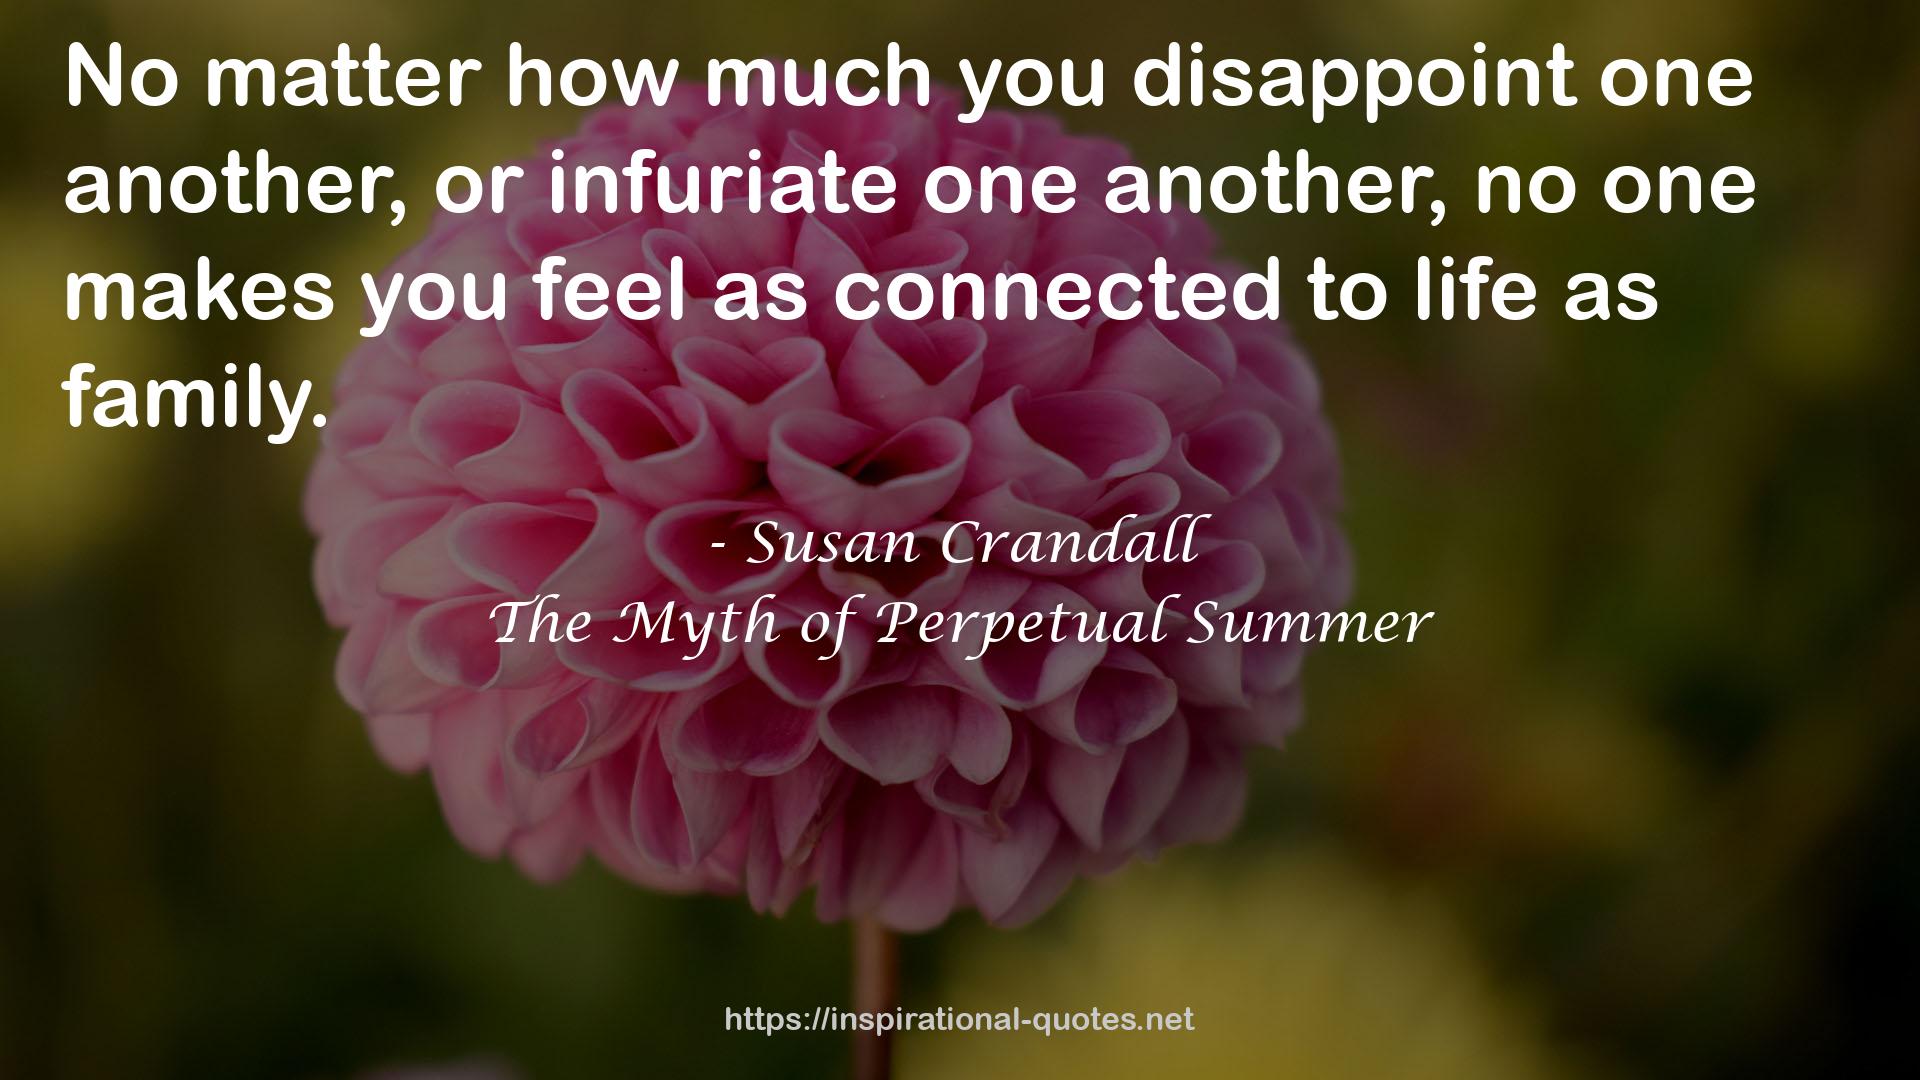 The Myth of Perpetual Summer QUOTES